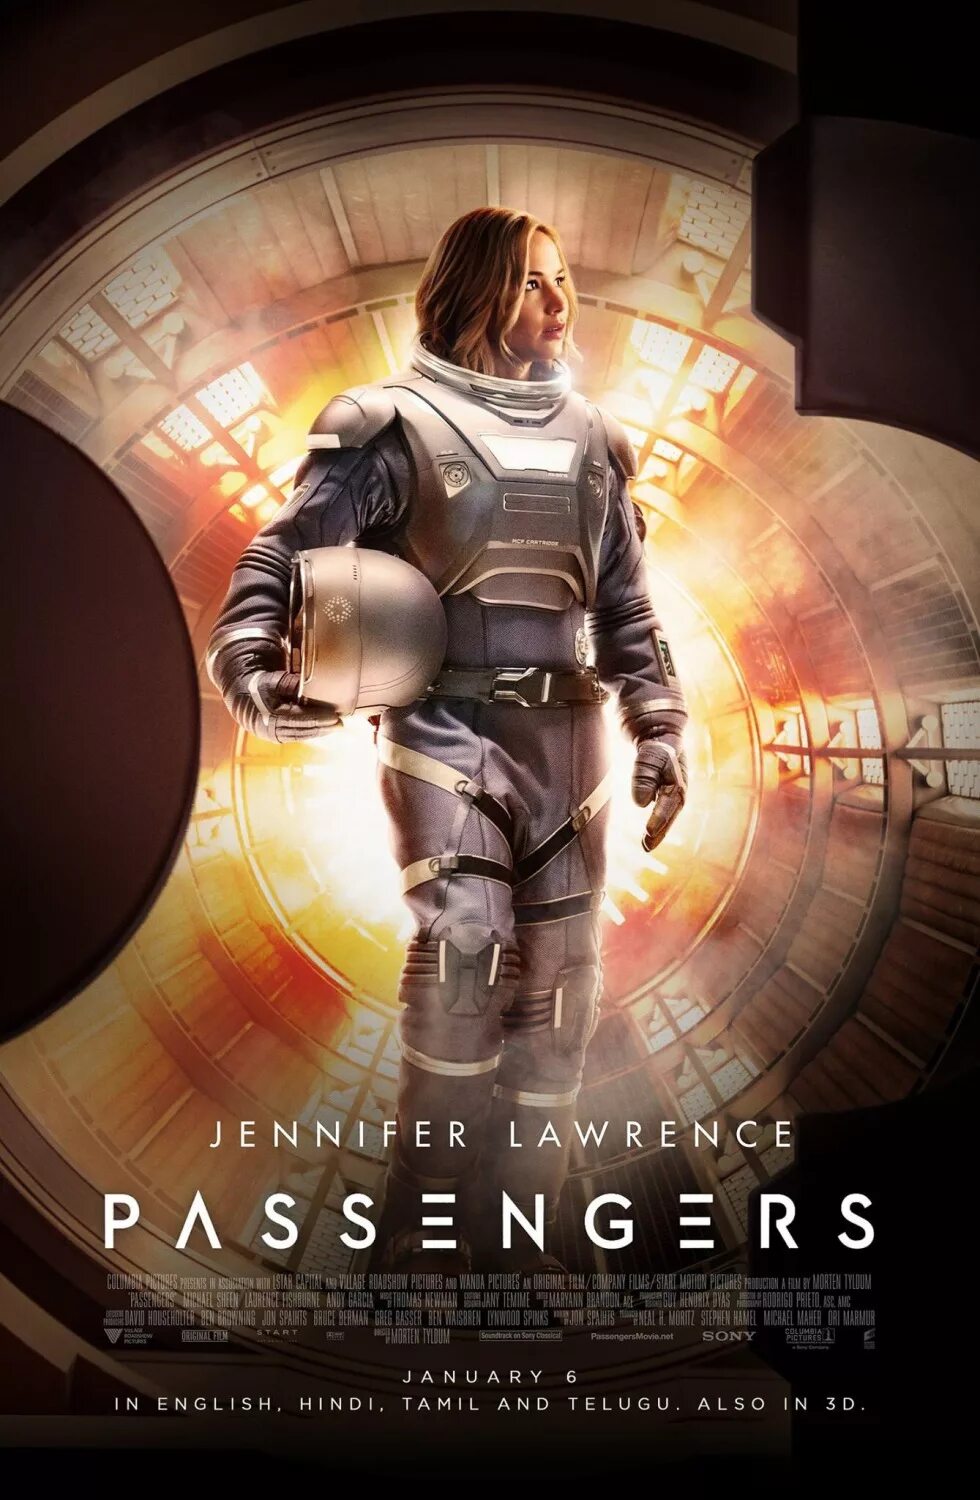 Fiction movies. Пассажиры (2016) poster. Пассажиры (Passengers) 2016 Постер.